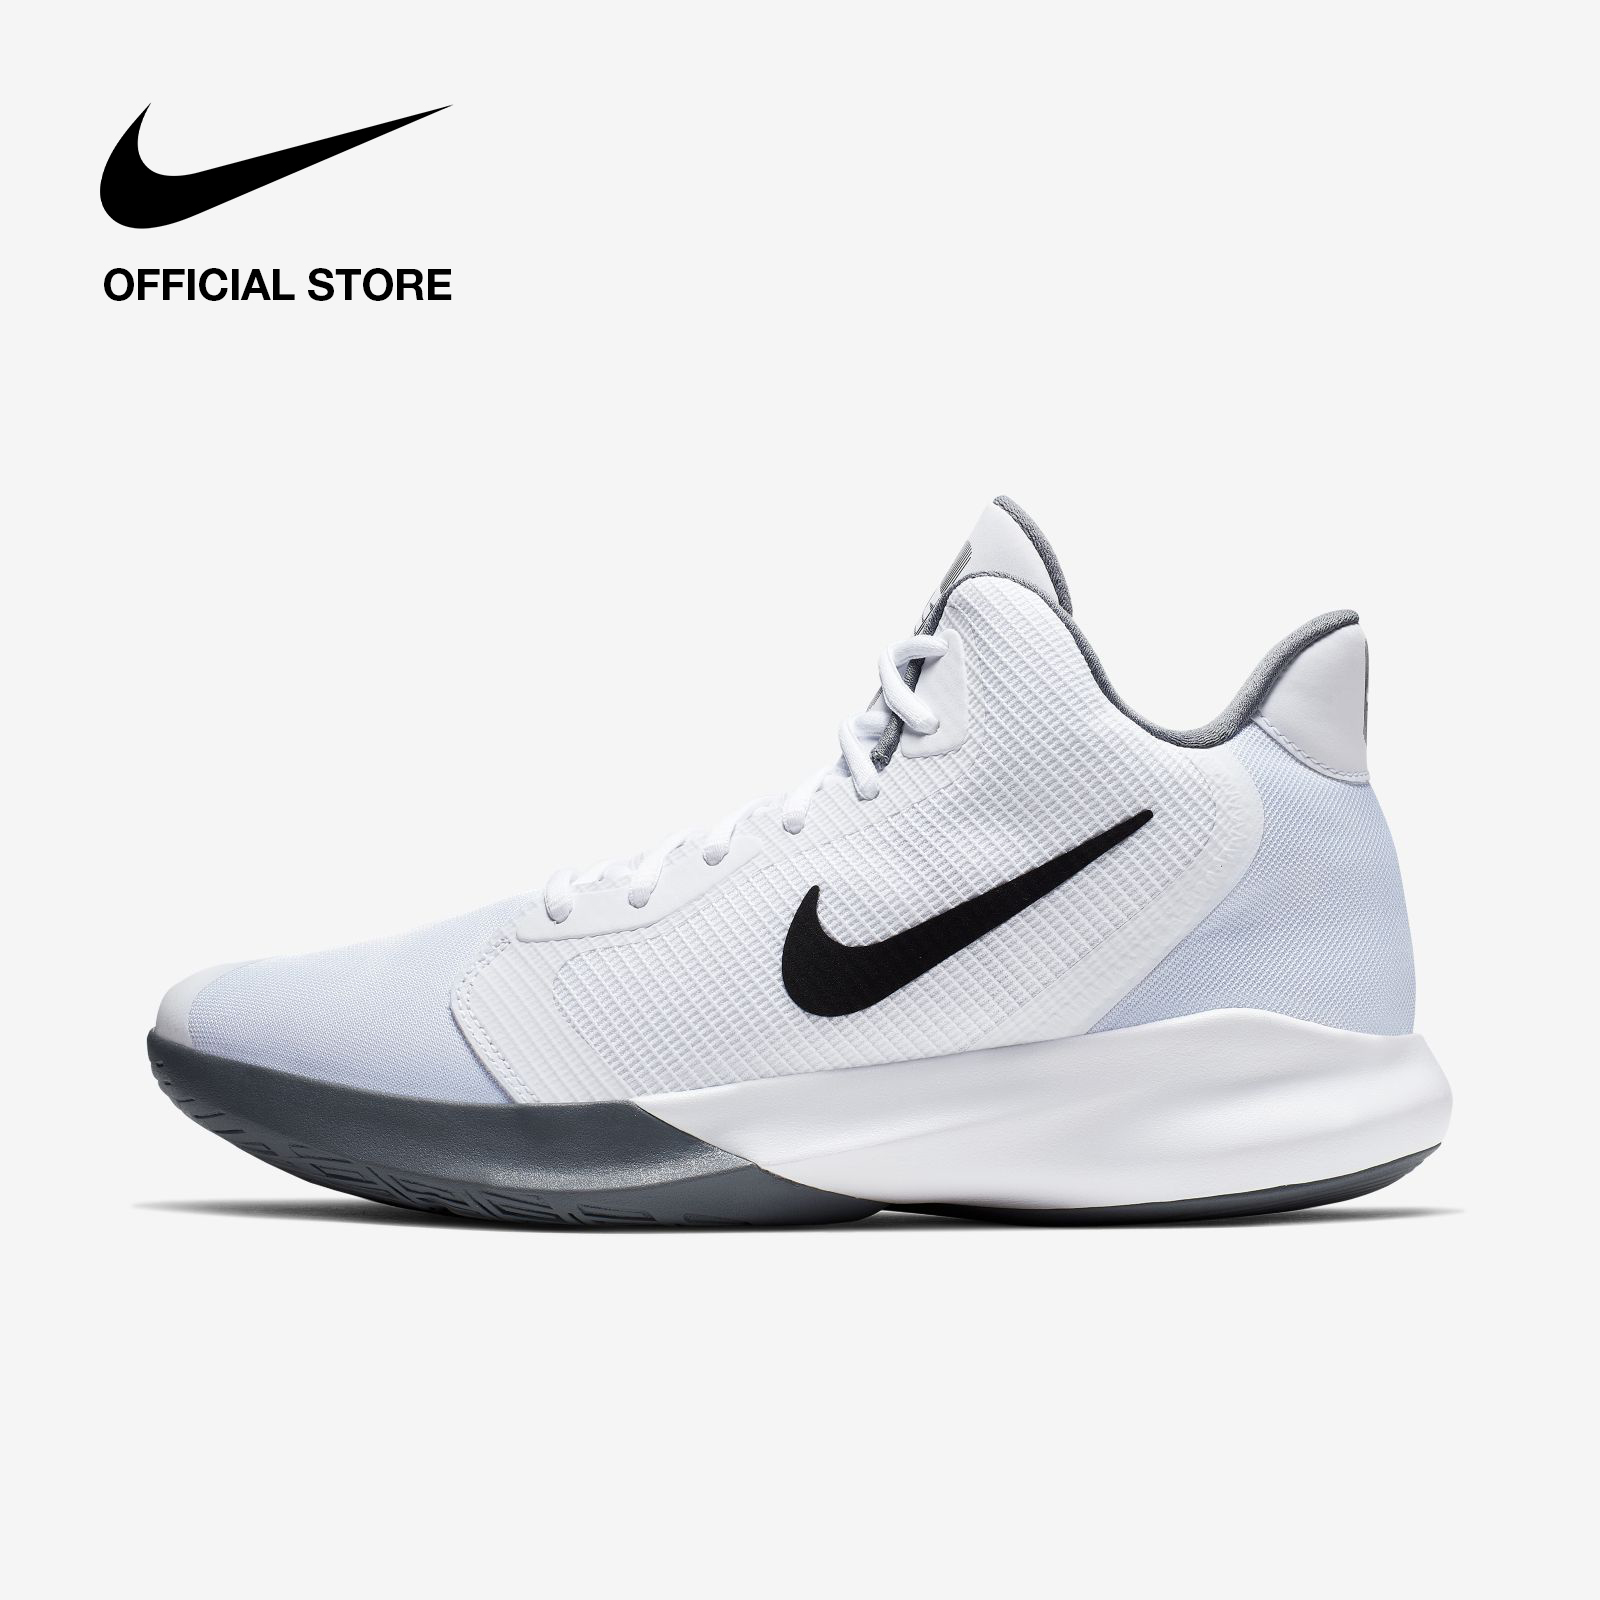 nike philippines basketball shoes price list